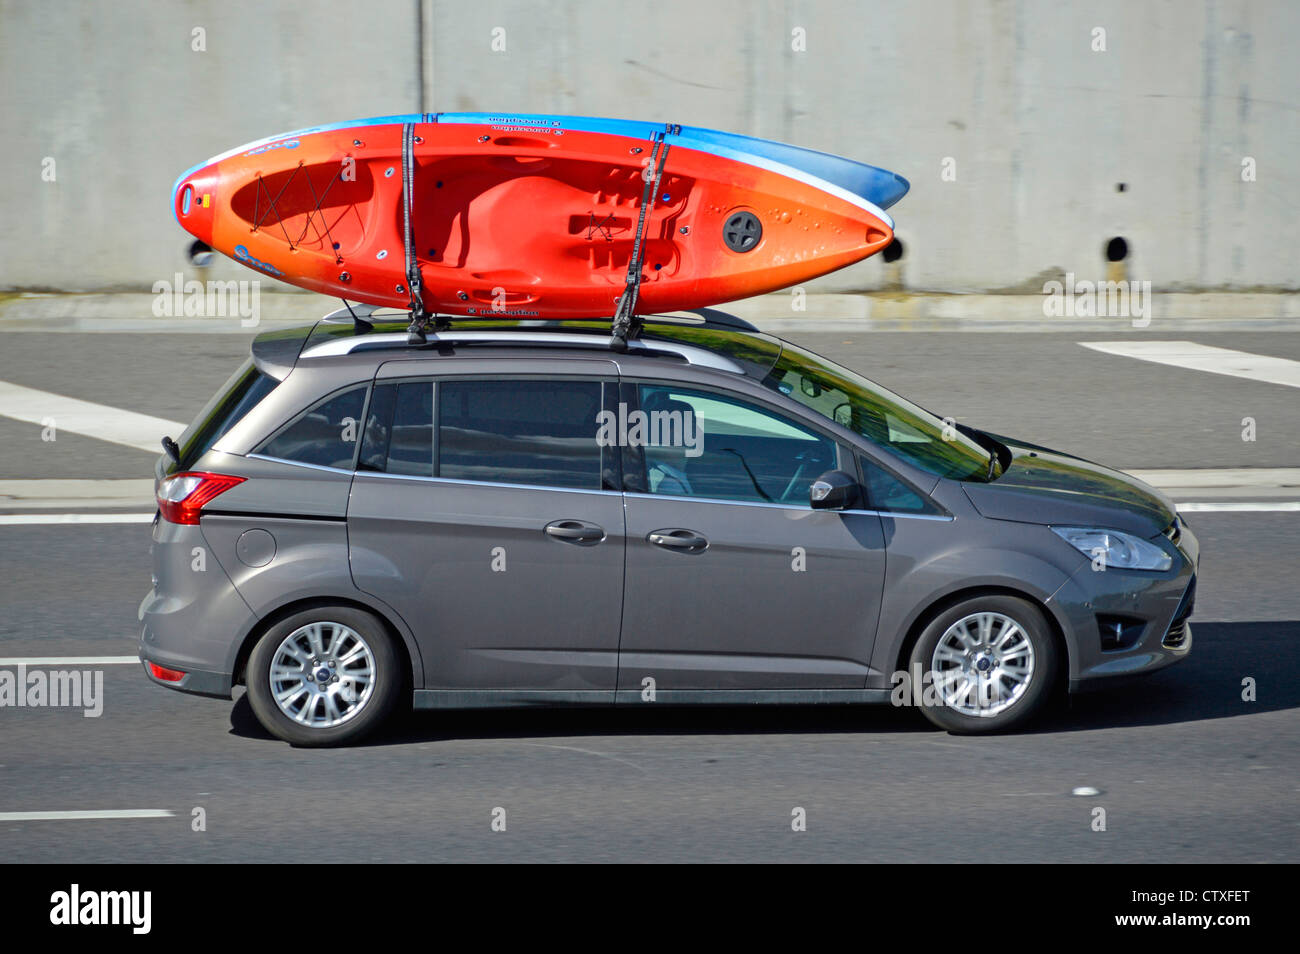 Car driving along with transporting canoe kayaks on roof rack Stock Photo